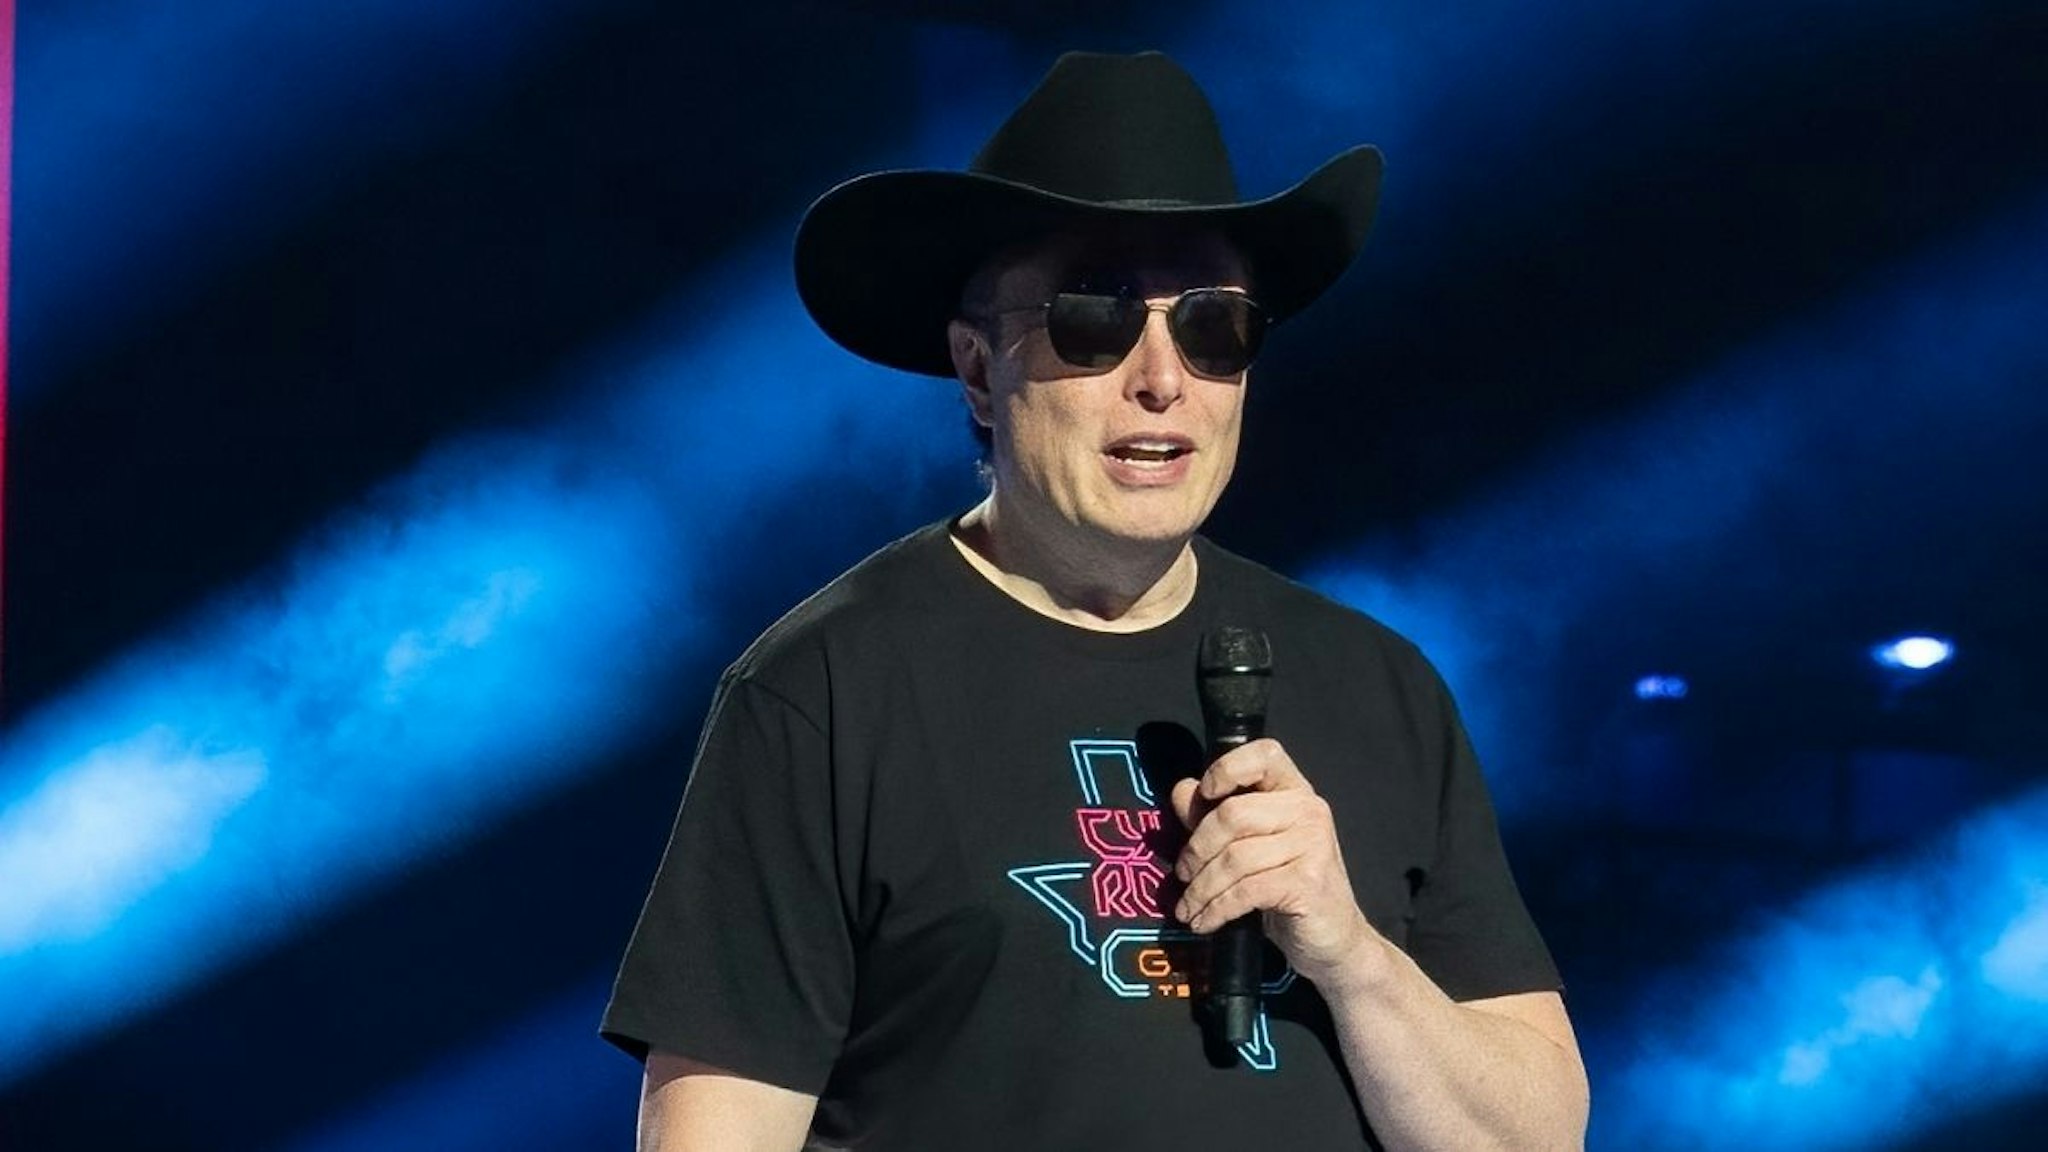 CEO of Tesla Motors Elon Musk speaks at the Tesla Giga Texas manufacturing "Cyber Rodeo" grand opening party on April 7, 2022 in Austin, Texas.